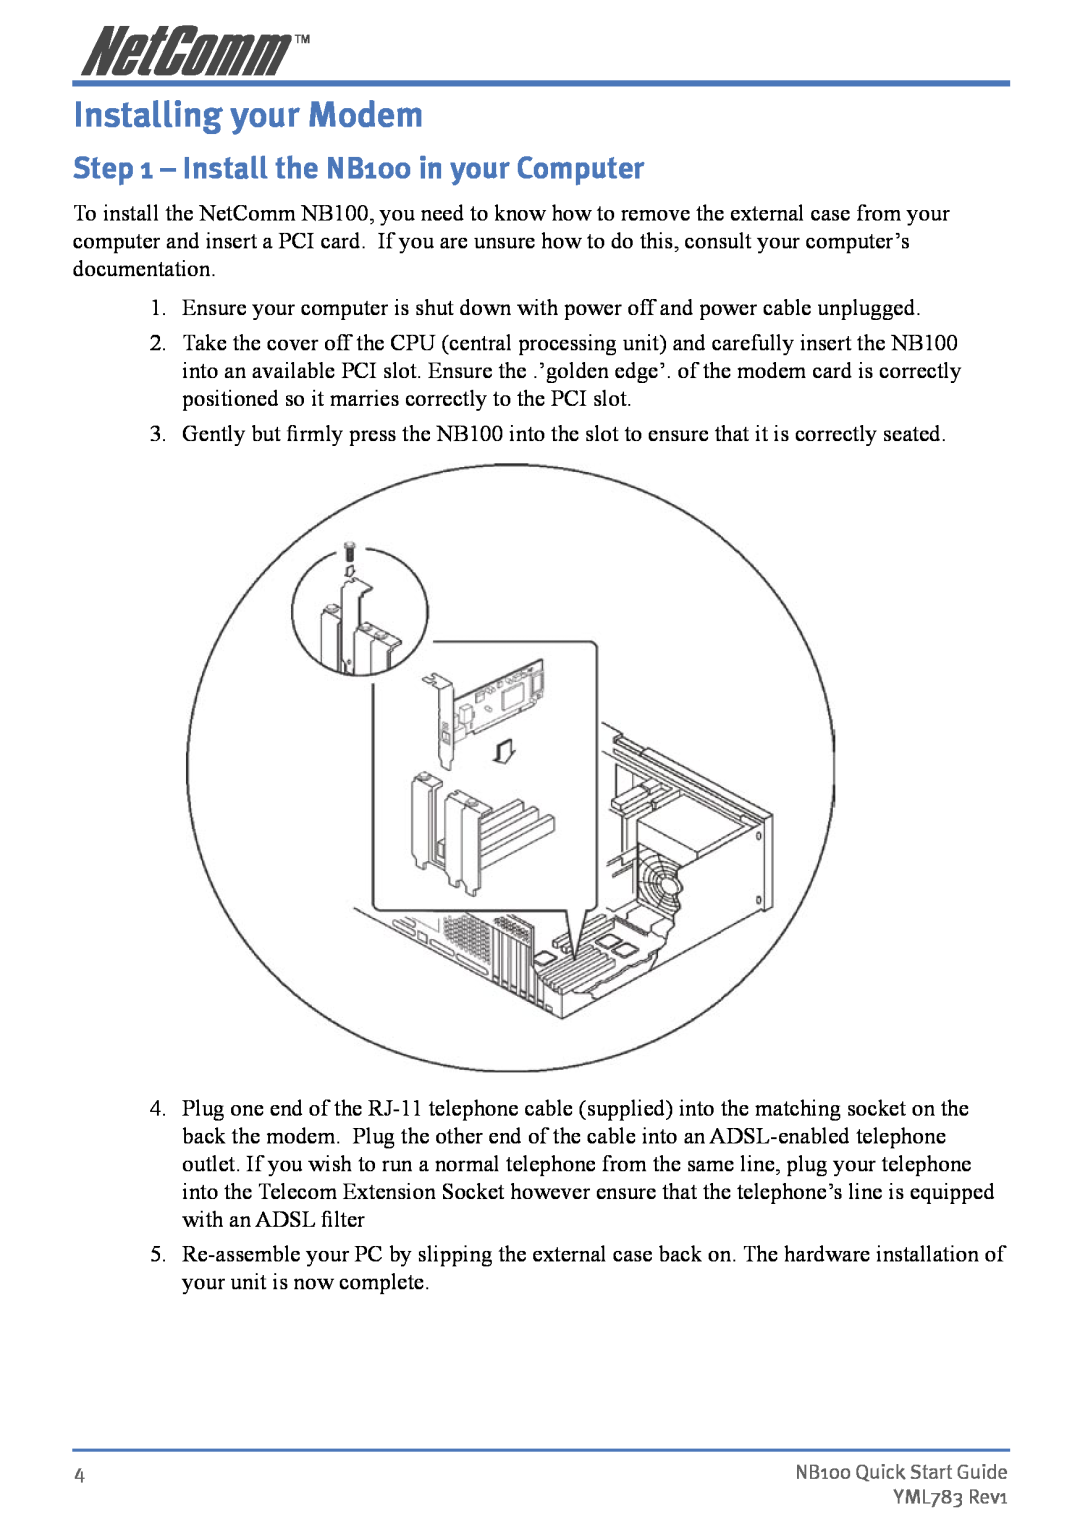 NetComm manual Installing your Modem, Install the NB100 in your Computer 